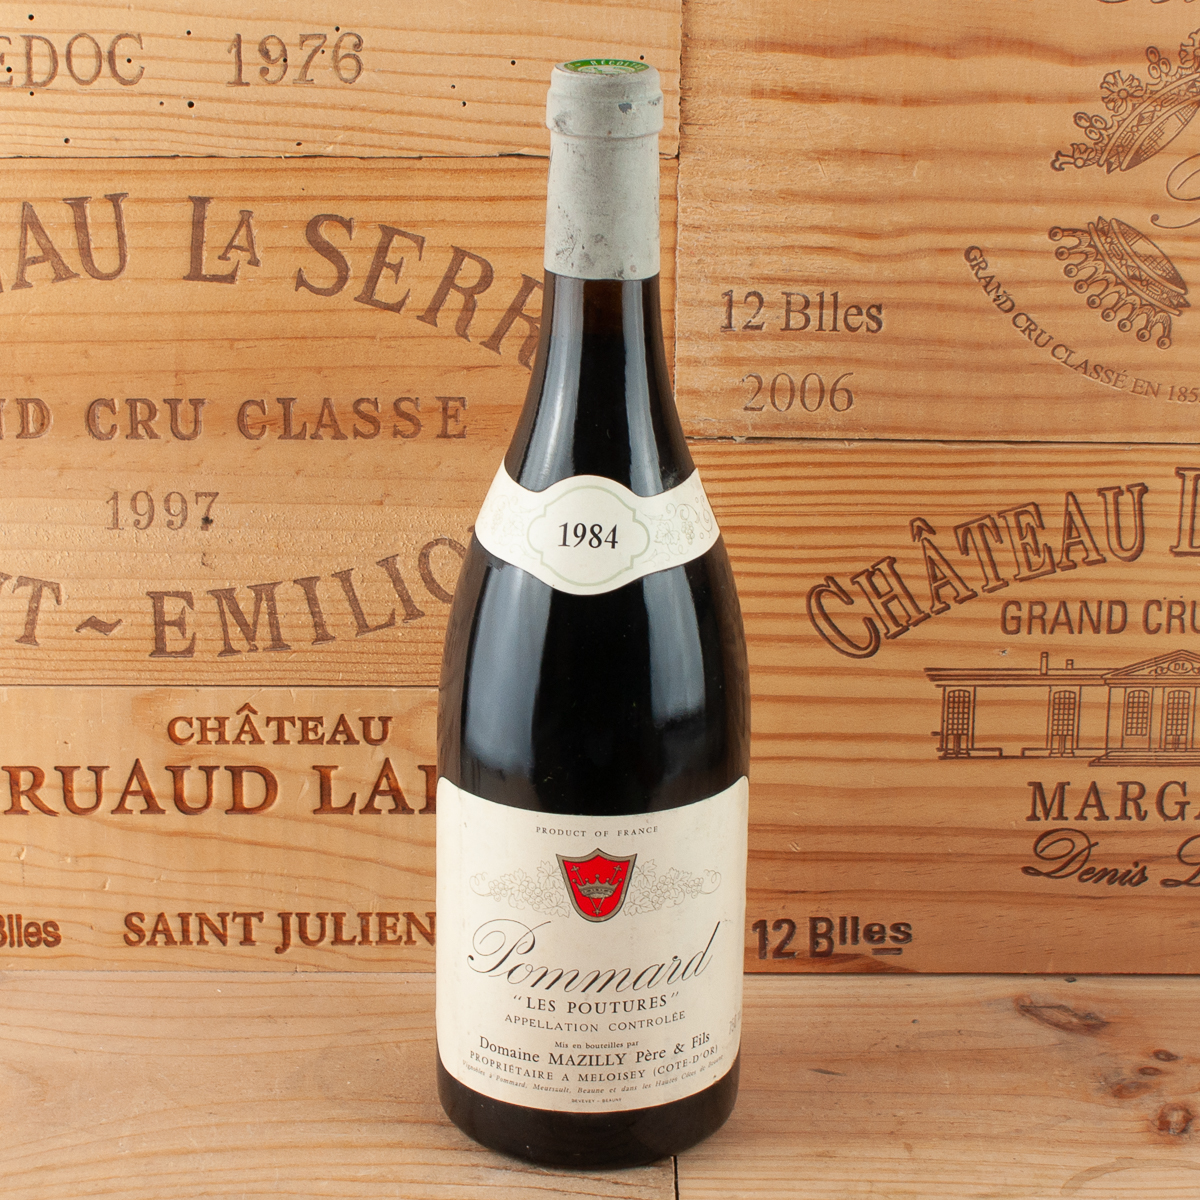 1984 Pommard 1er Cru Les Poutures Domaine Mazilly